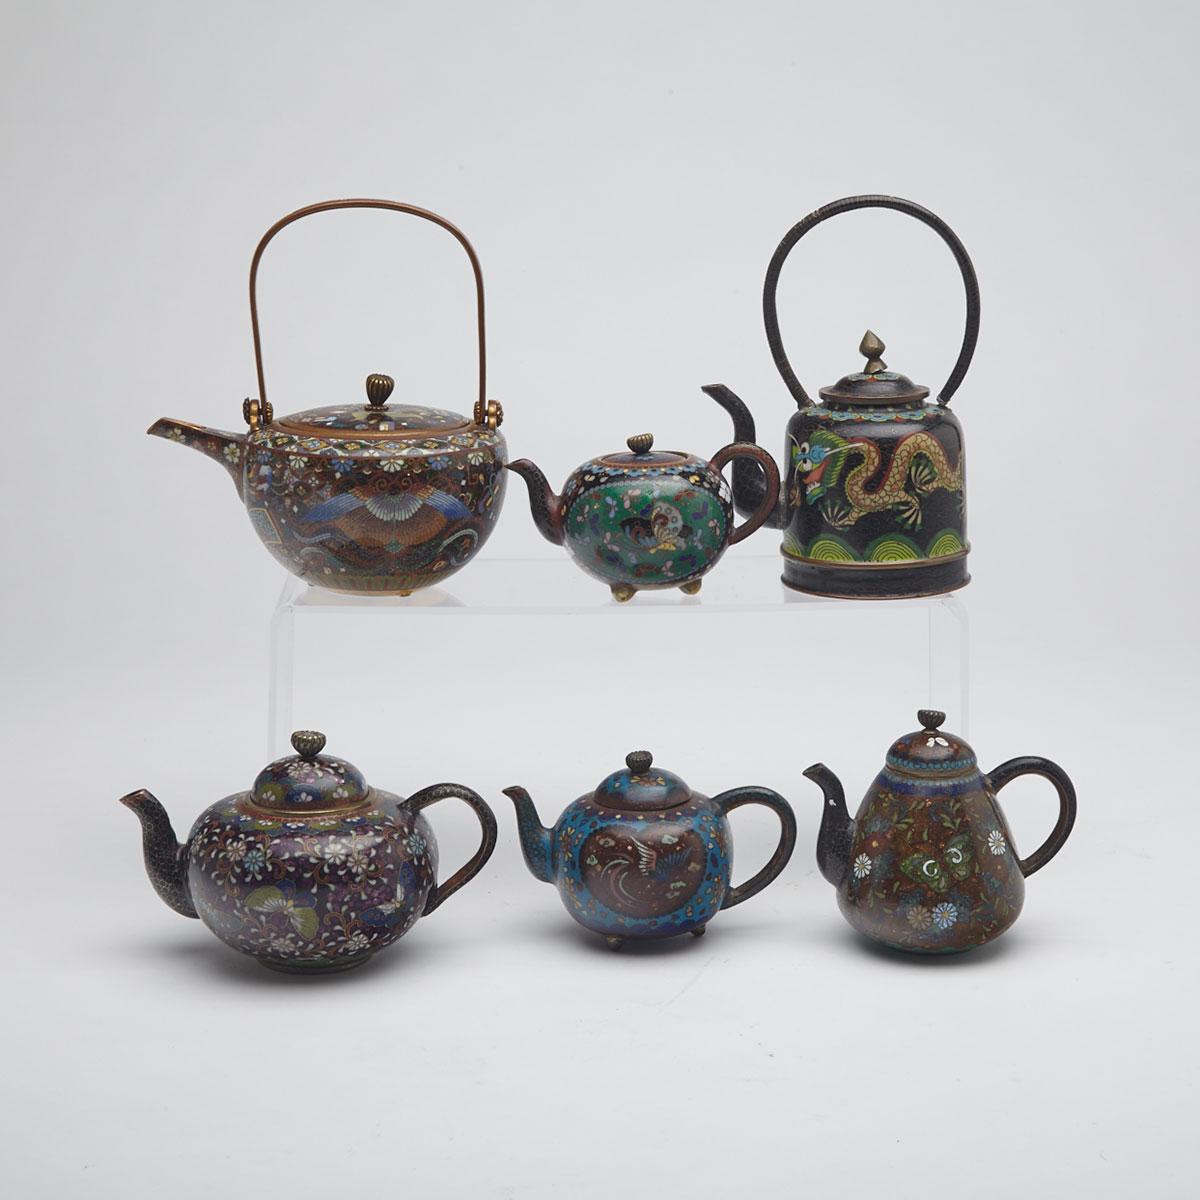 Six Cloisonné Enamel Teapots, China and Japan, Early 20th Century